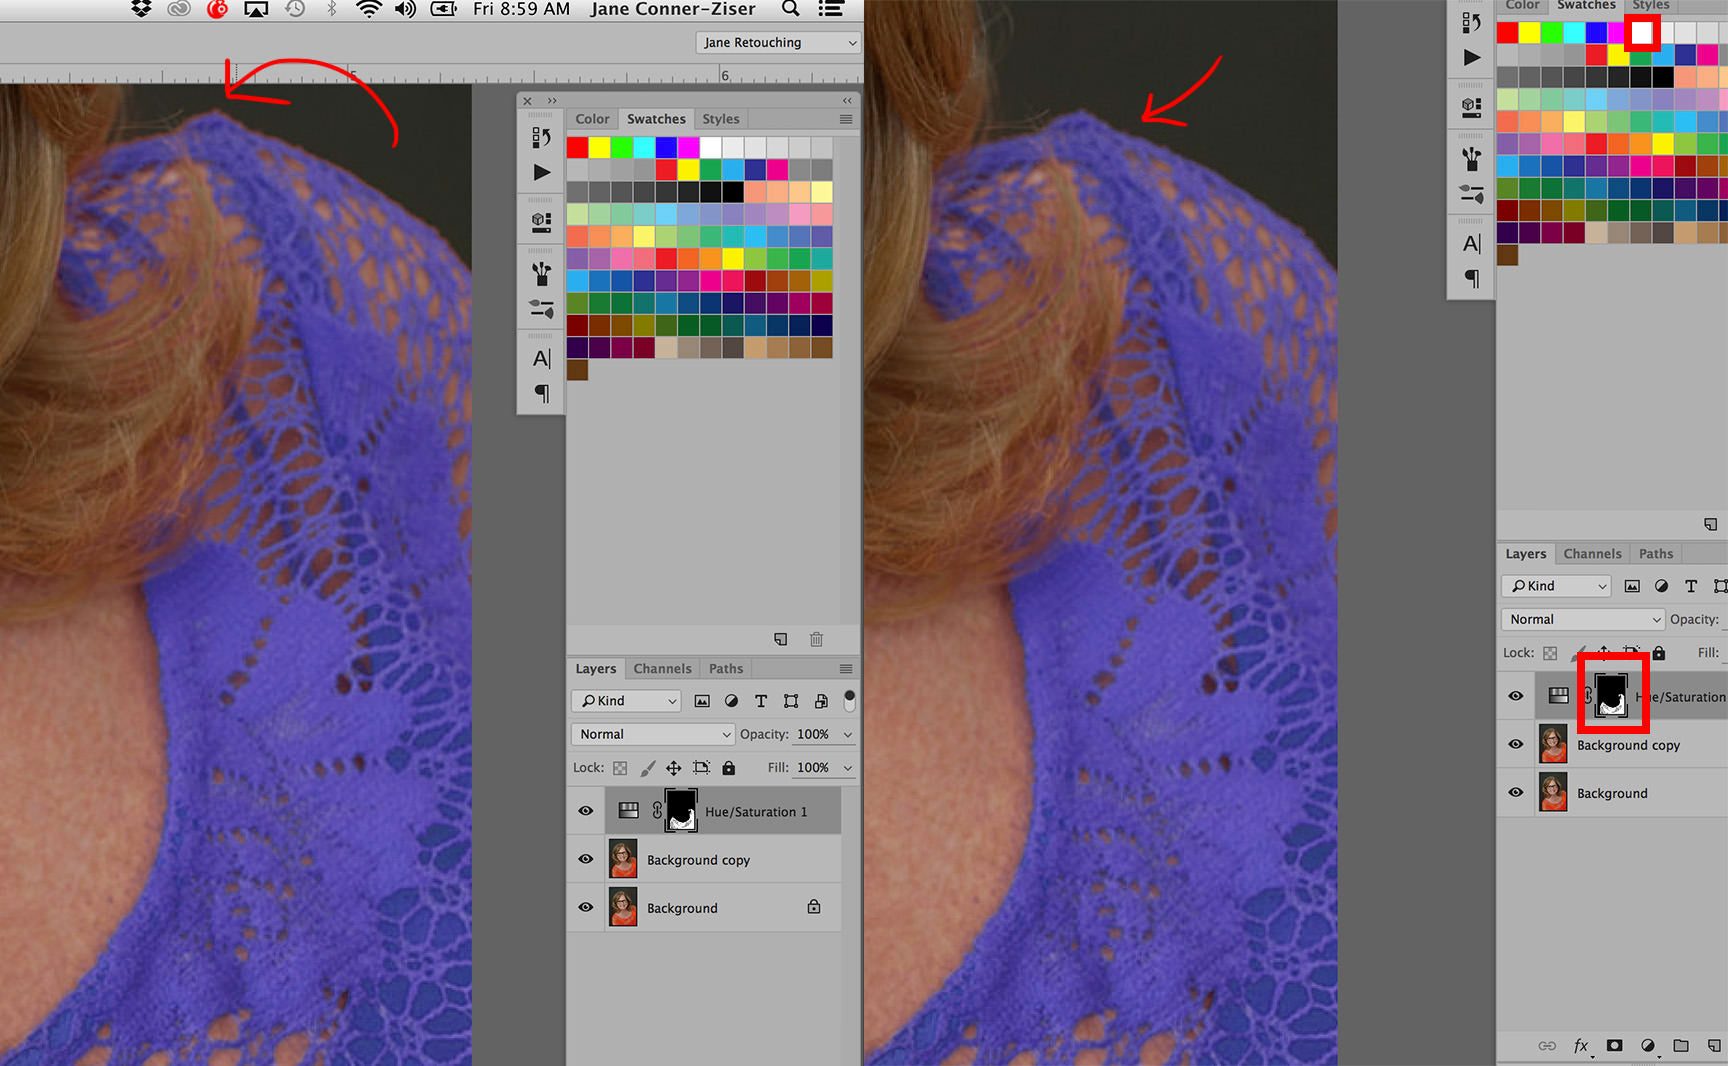 Editing a photo with Color Range of a woman with glasses wearing a lavender blouse